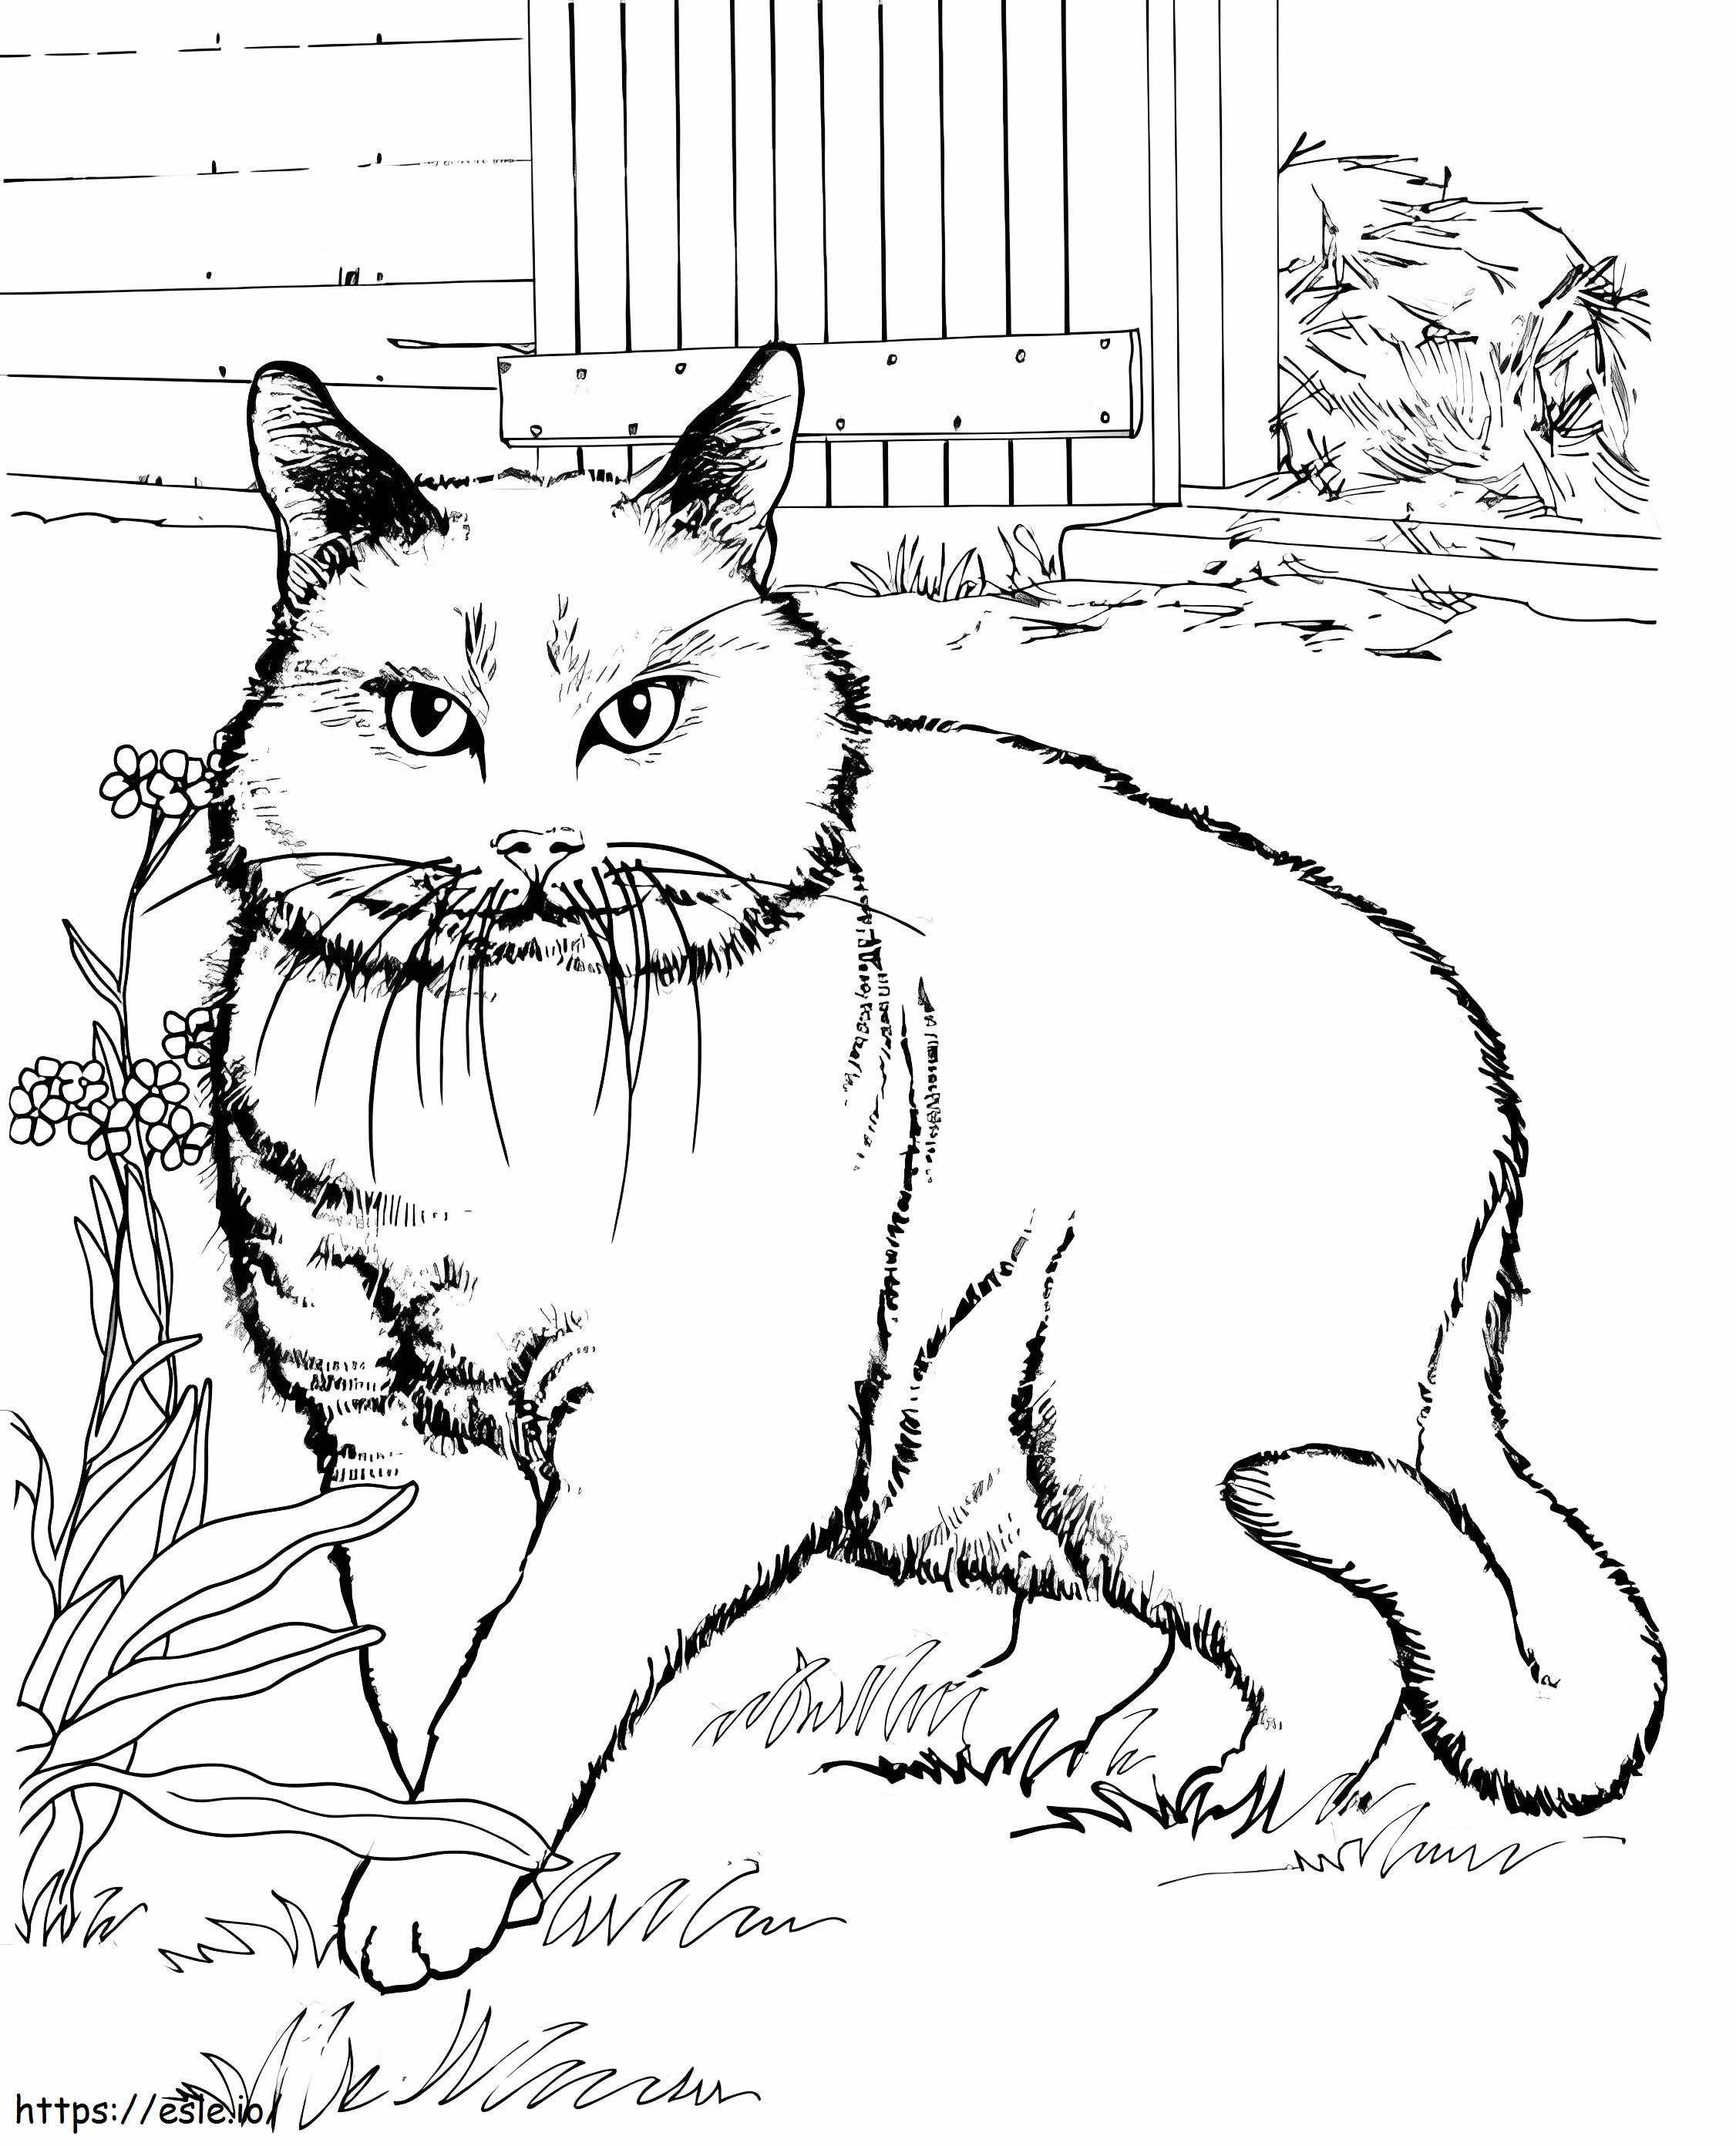 A Fat Cat coloring page